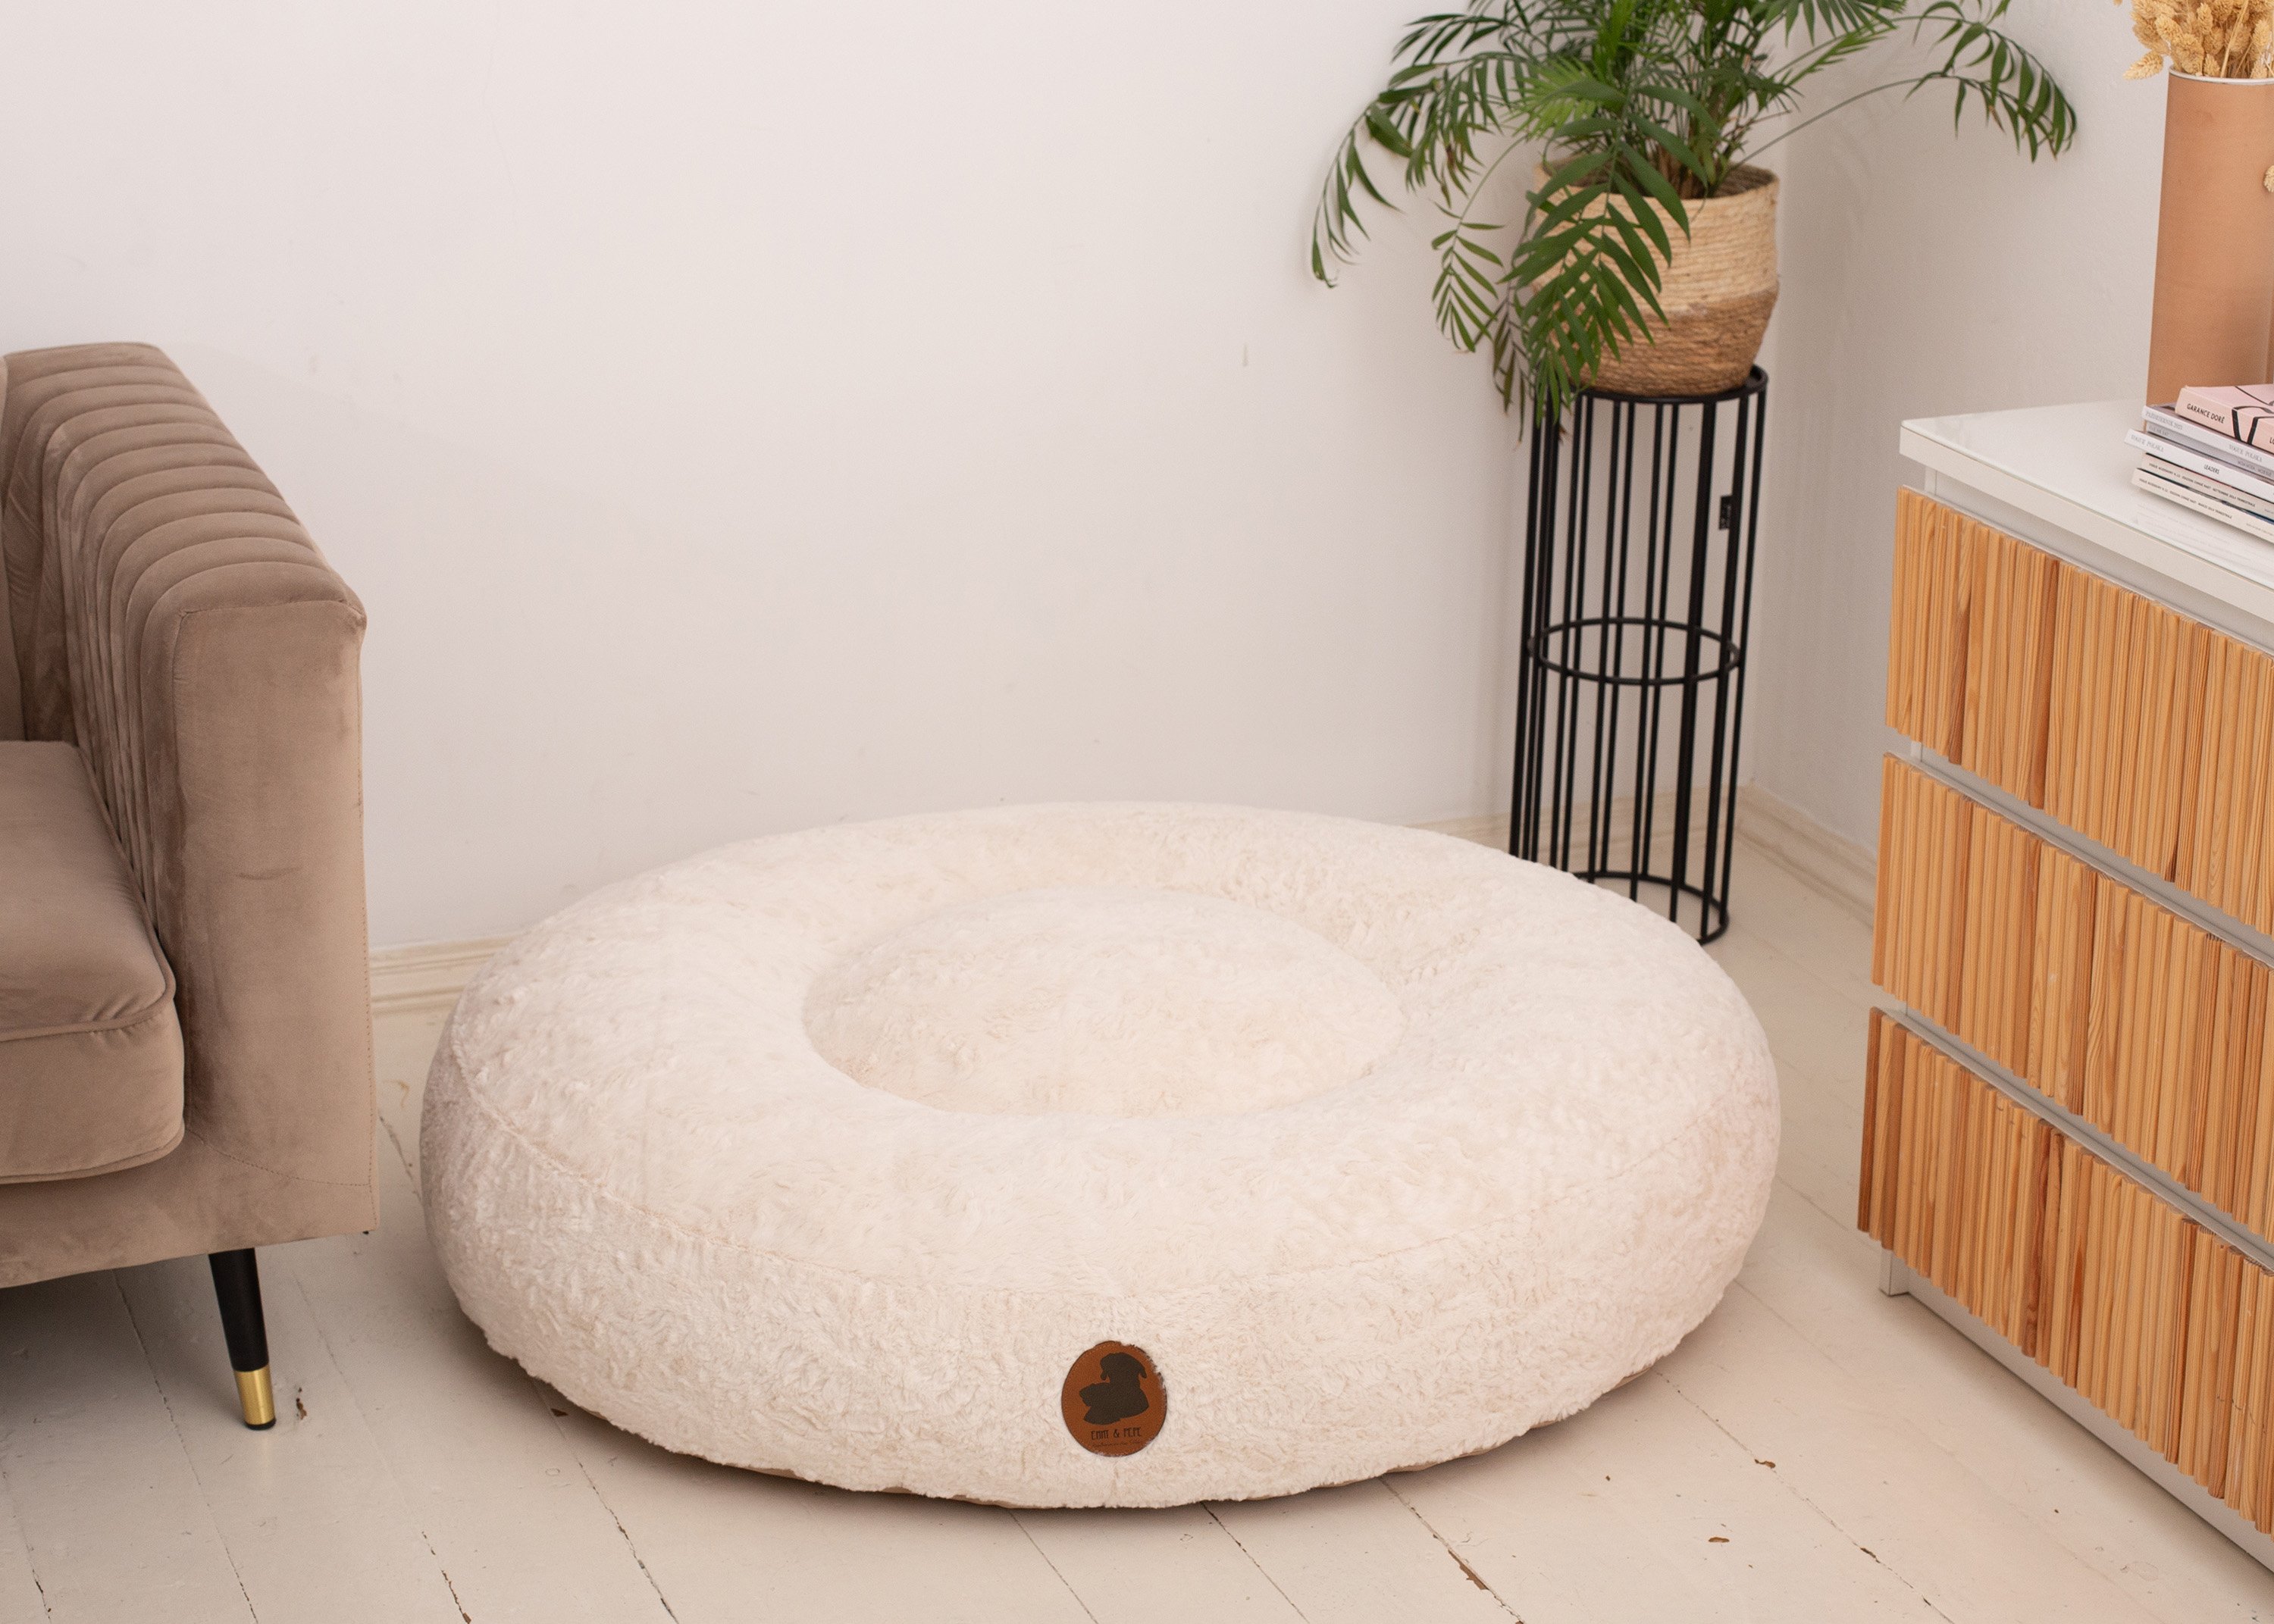 Wau-Bed Offset White Oval S (80x60cm)